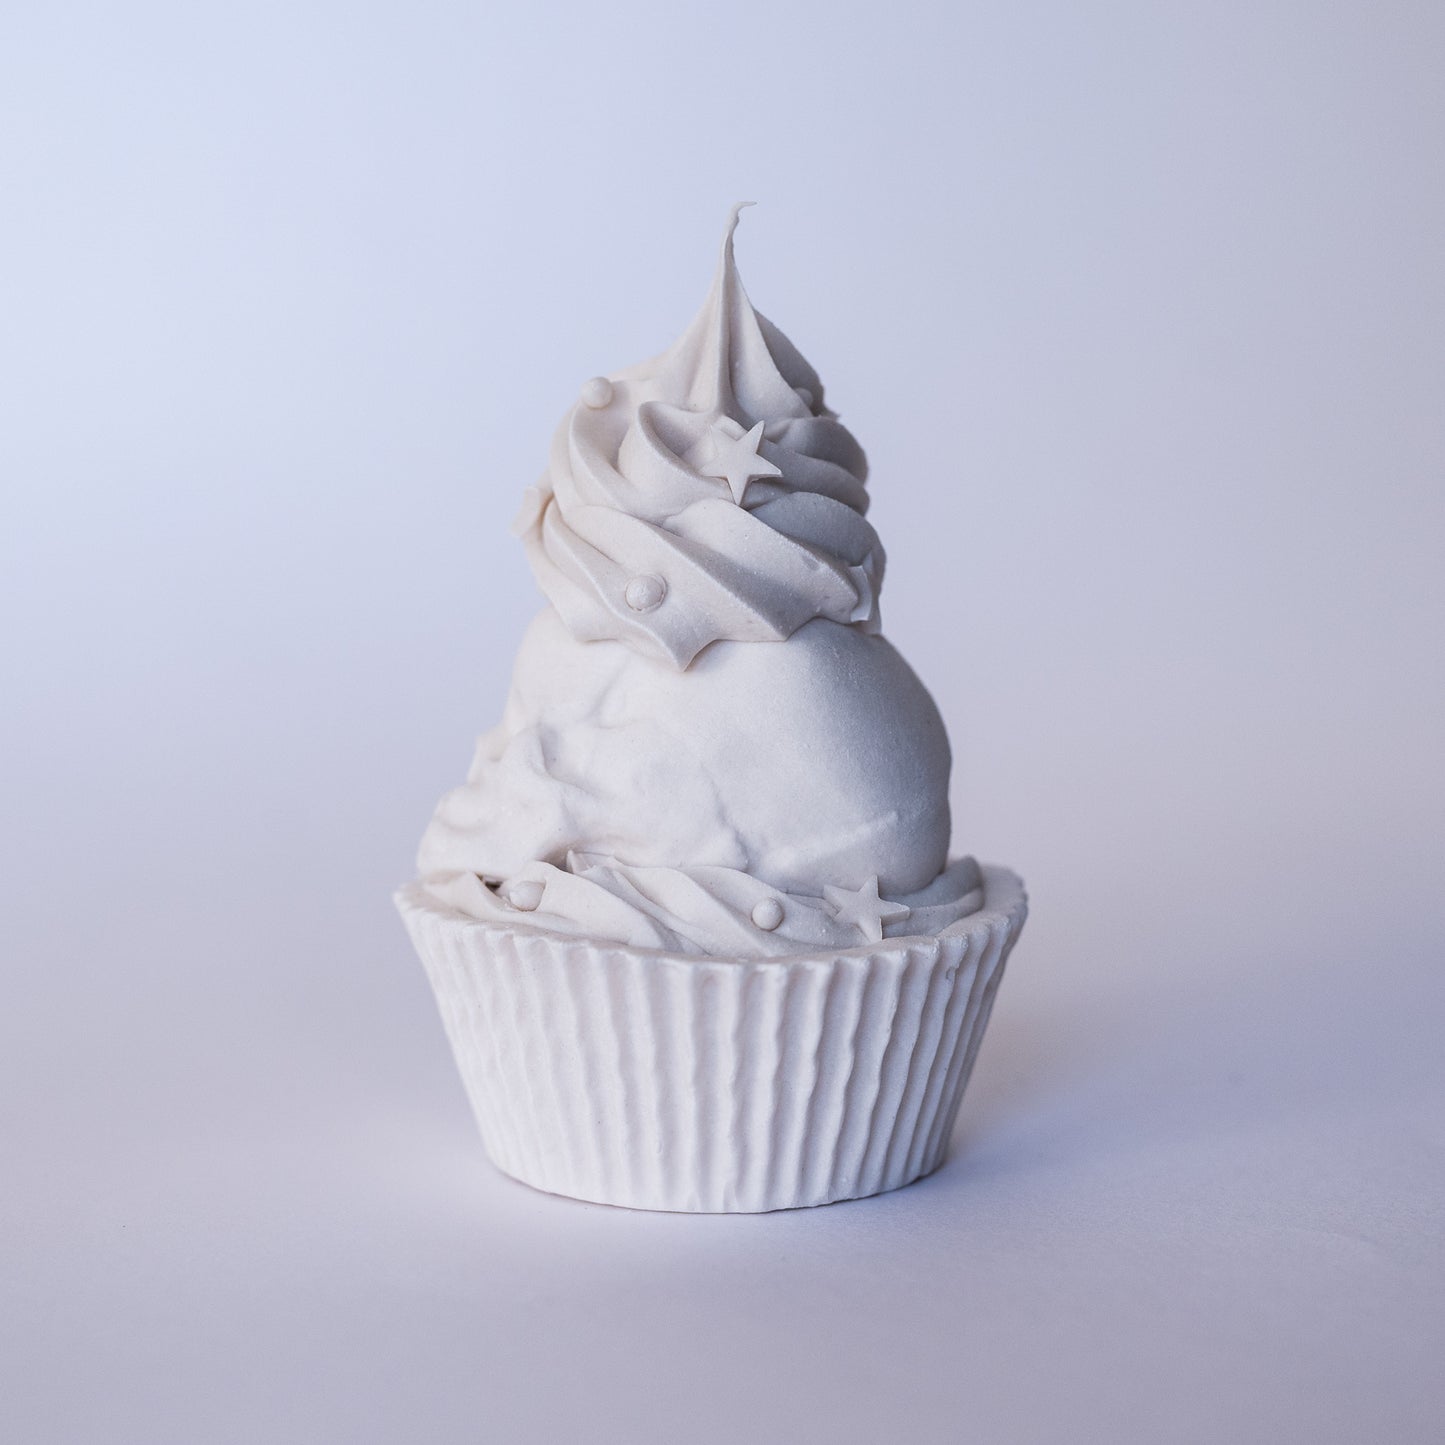 Frosted Skull Cupcake with Star Sprinkles (Limited Edition Porcelain Sculpture)